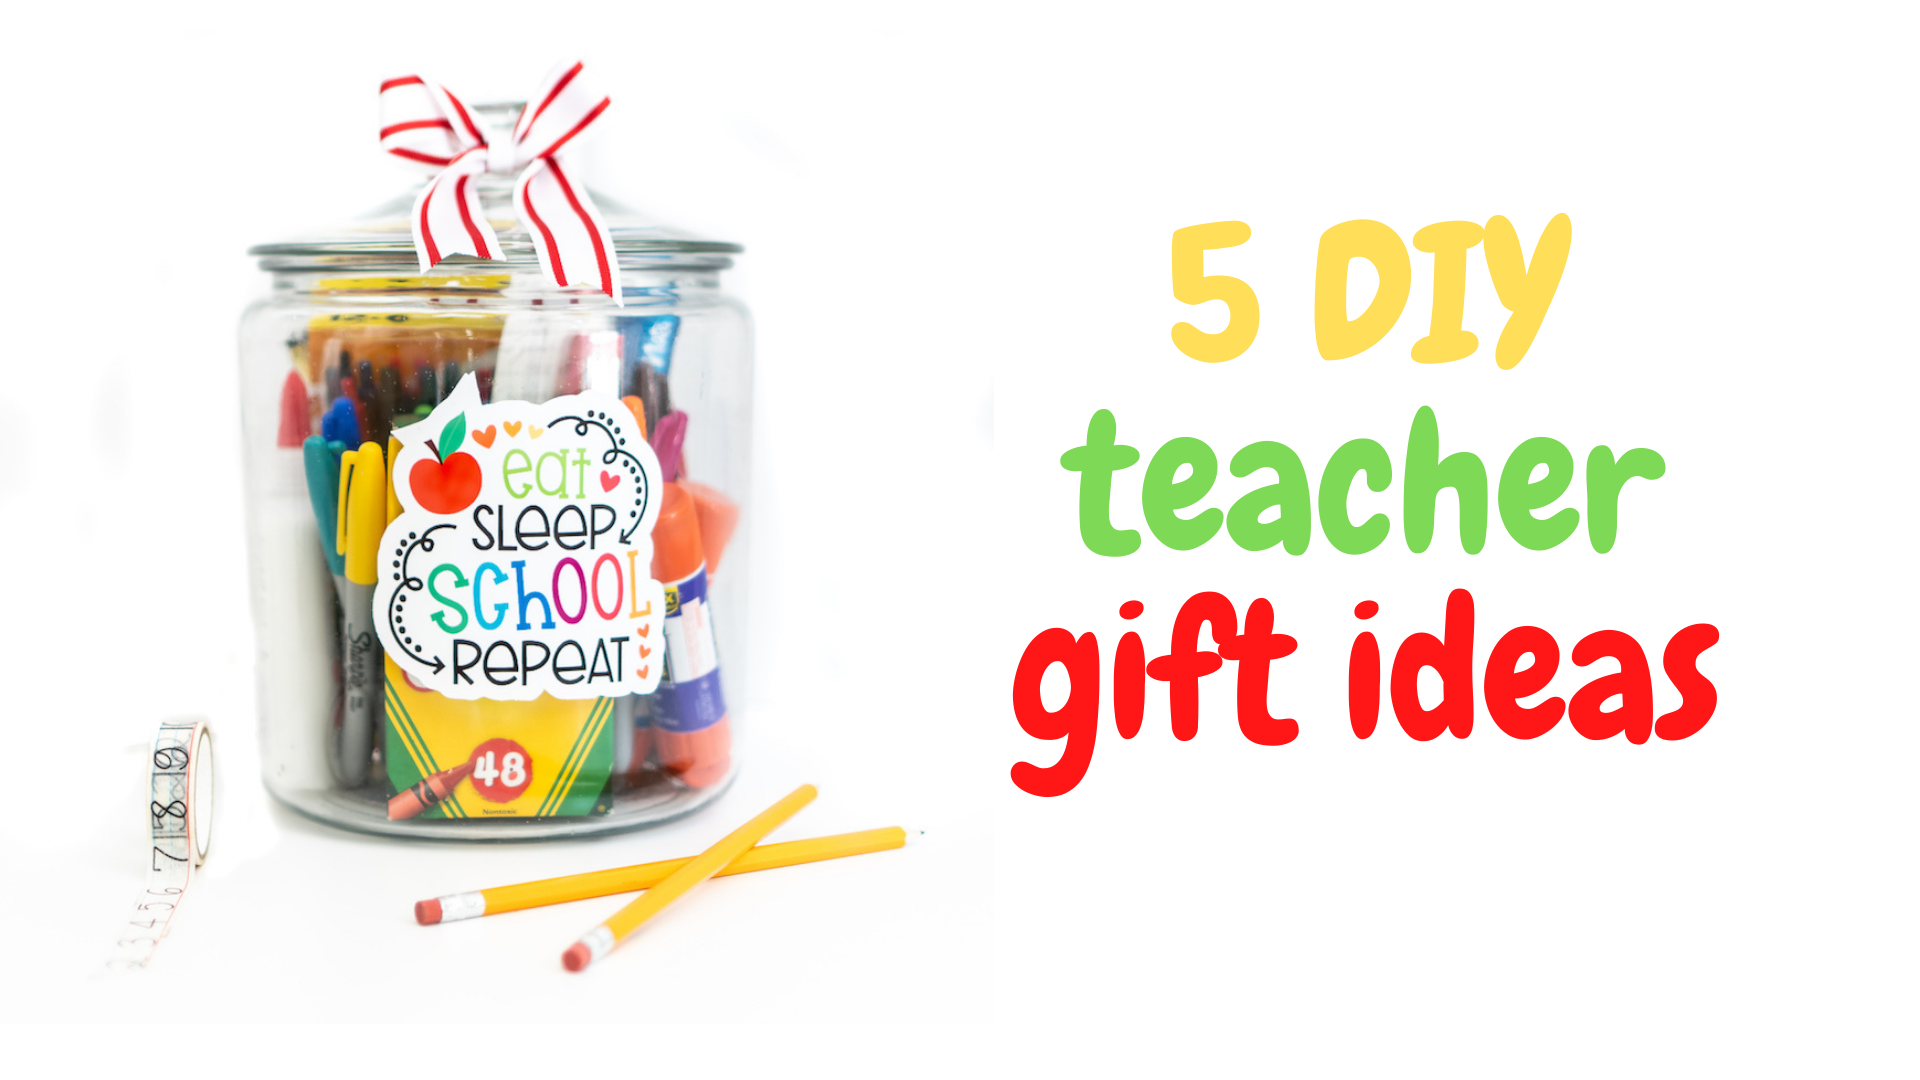 18 homemade teacher gifts to try - Gathered